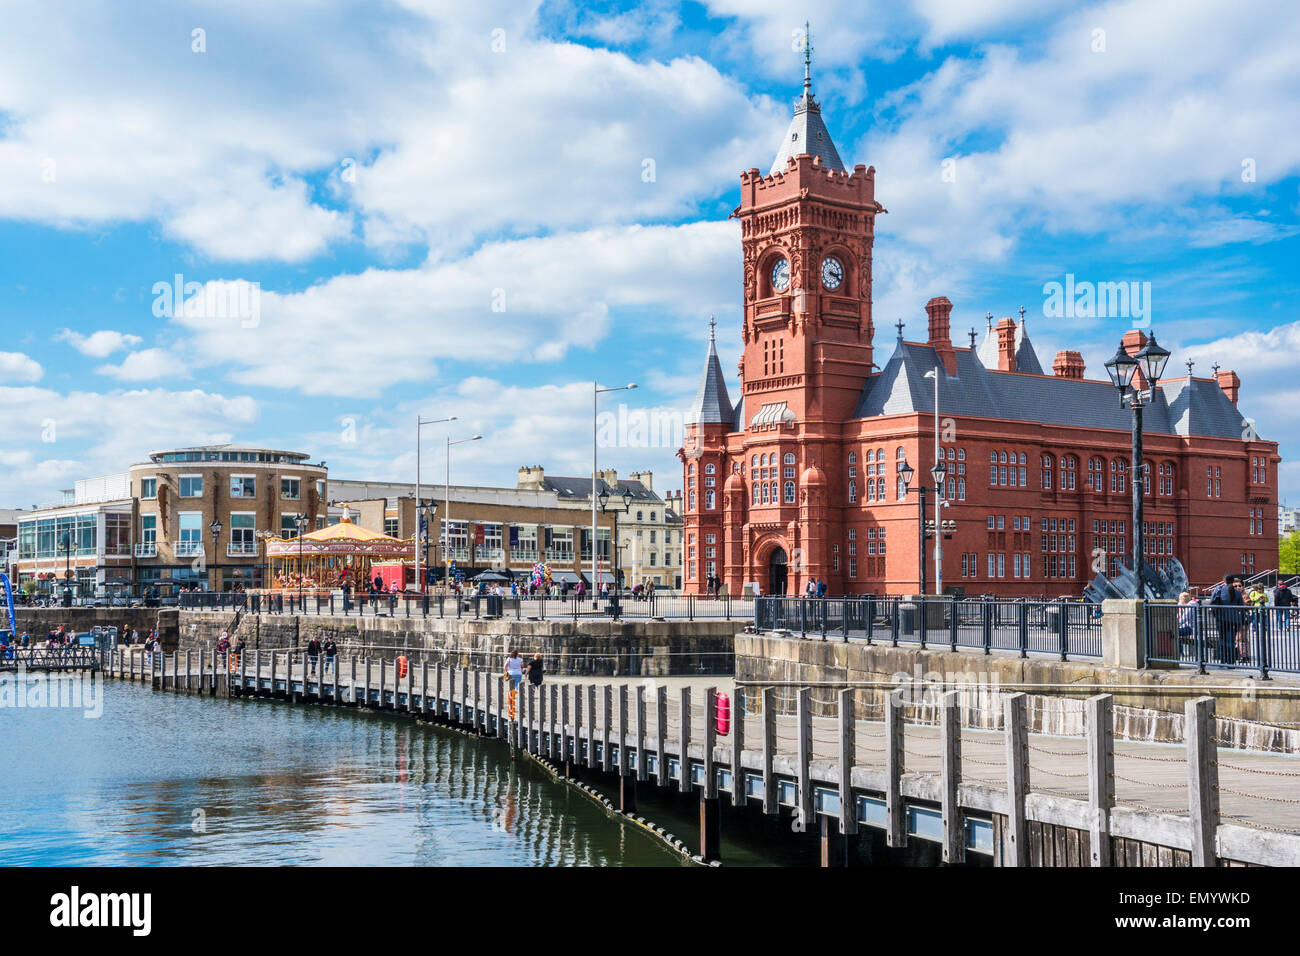 Pierhead Building Cardiff Bay Cardiff South Glamorgan South Wales GB UK EU Europe Banque D'Images